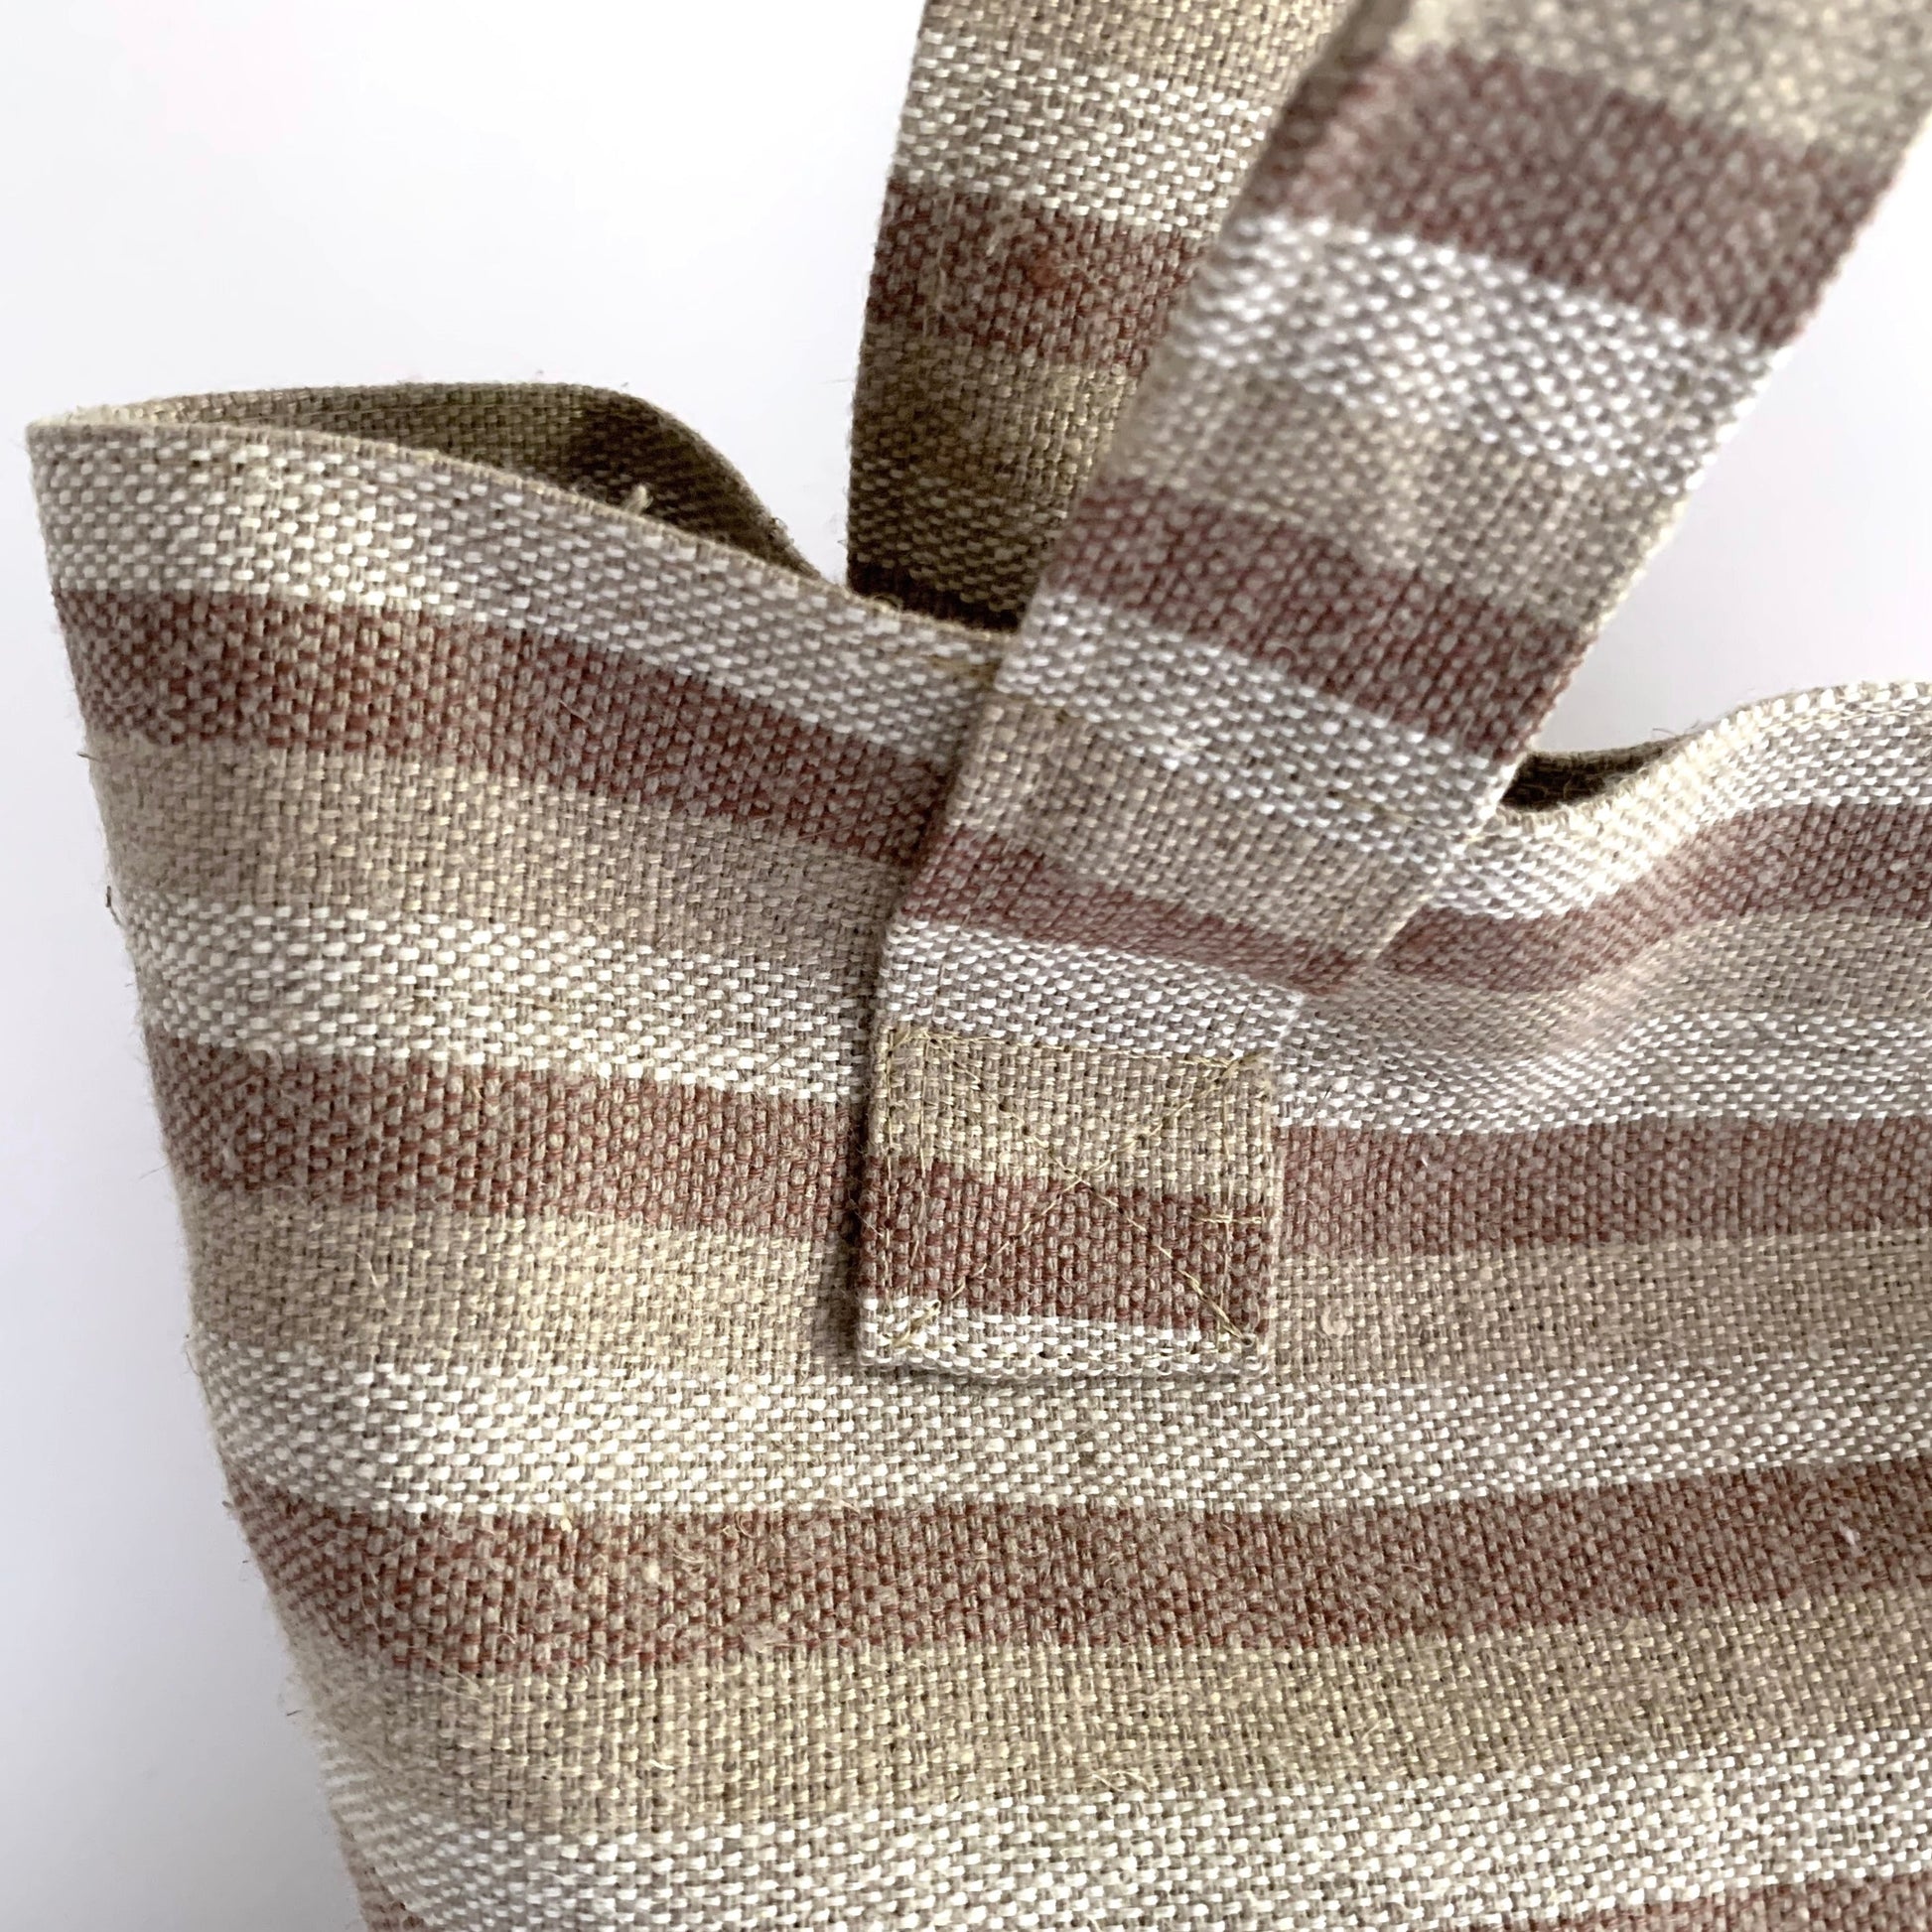 close up detail of woven striped fabric in neutral colors on beach bag